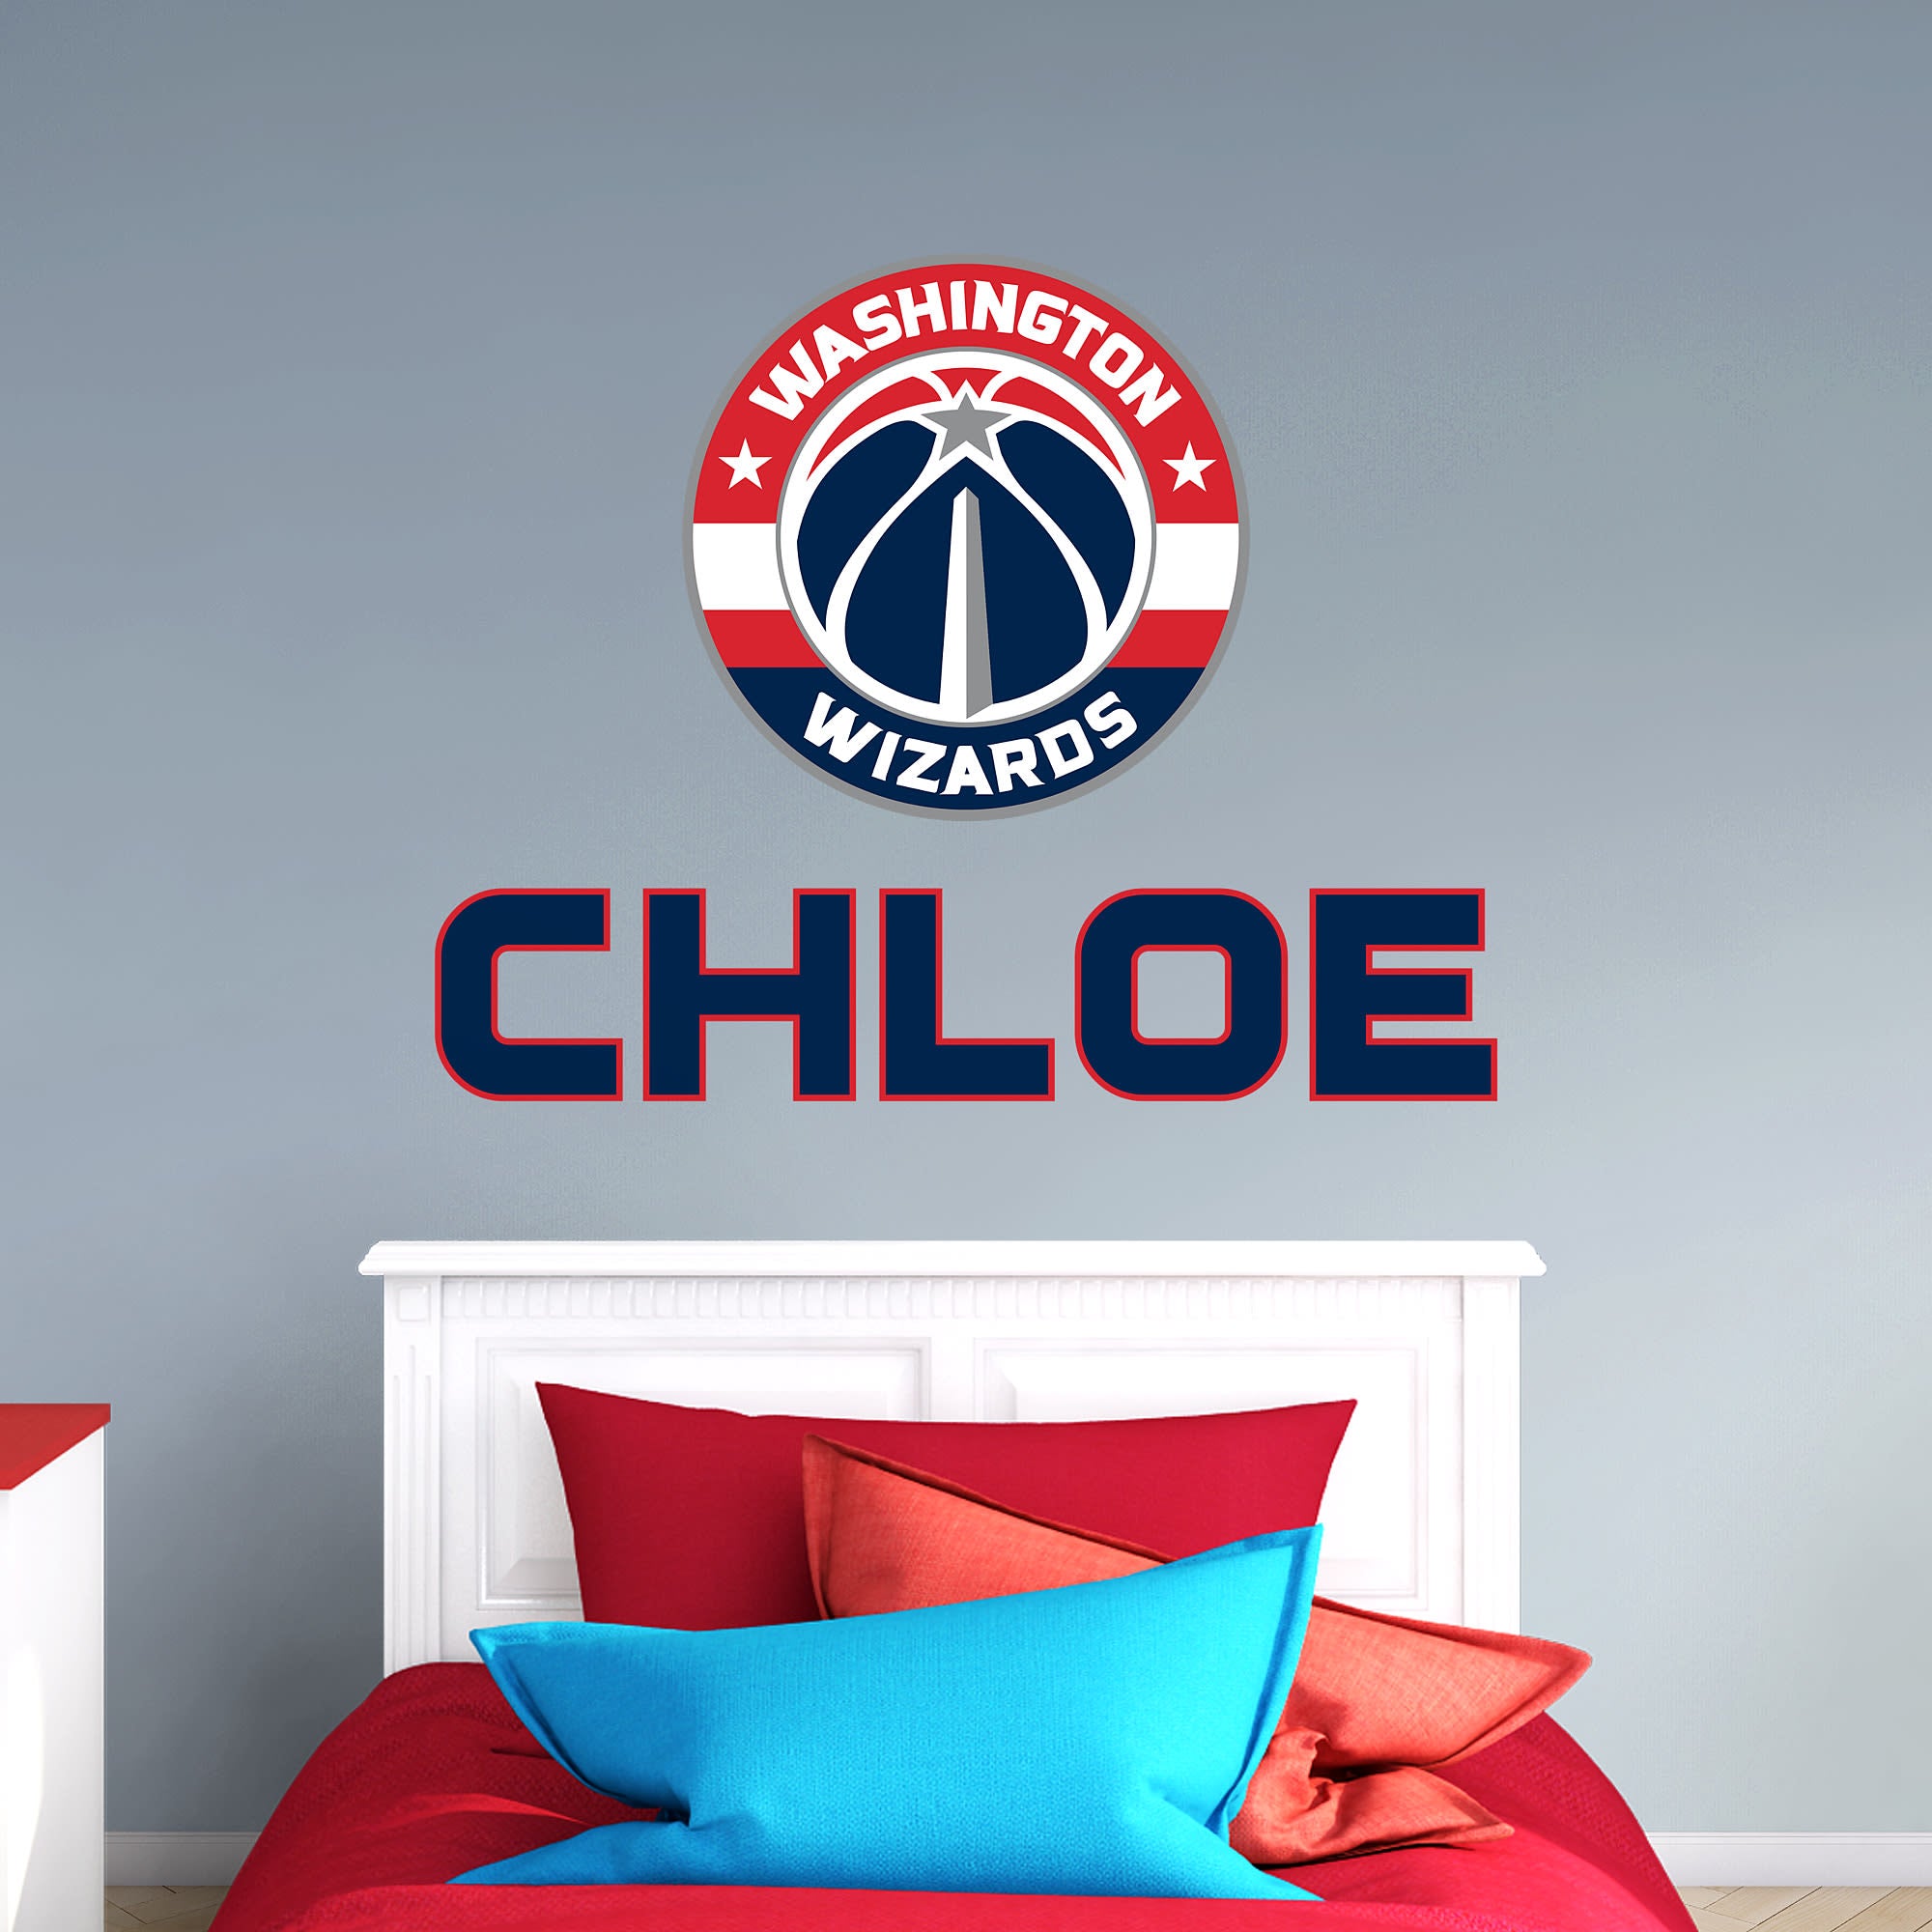 Washington Wizards: Stacked Personalized Name - Officially Licensed NBA Transfer Decal in Navy (52"W x 39.5"H) by Fathead | Viny